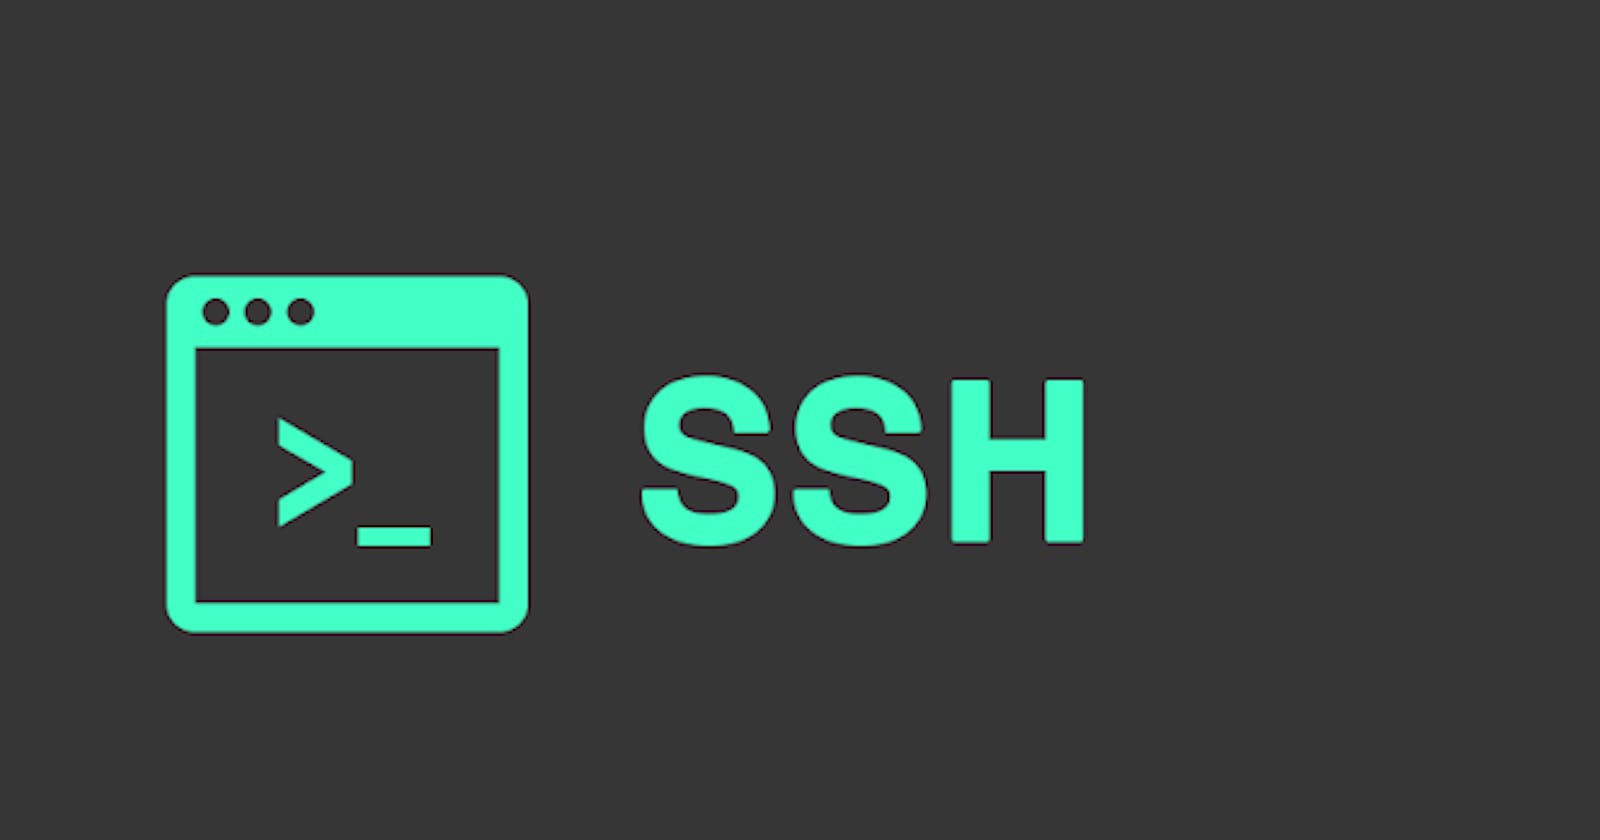 Find & Locate | SSH (Secure Shell)